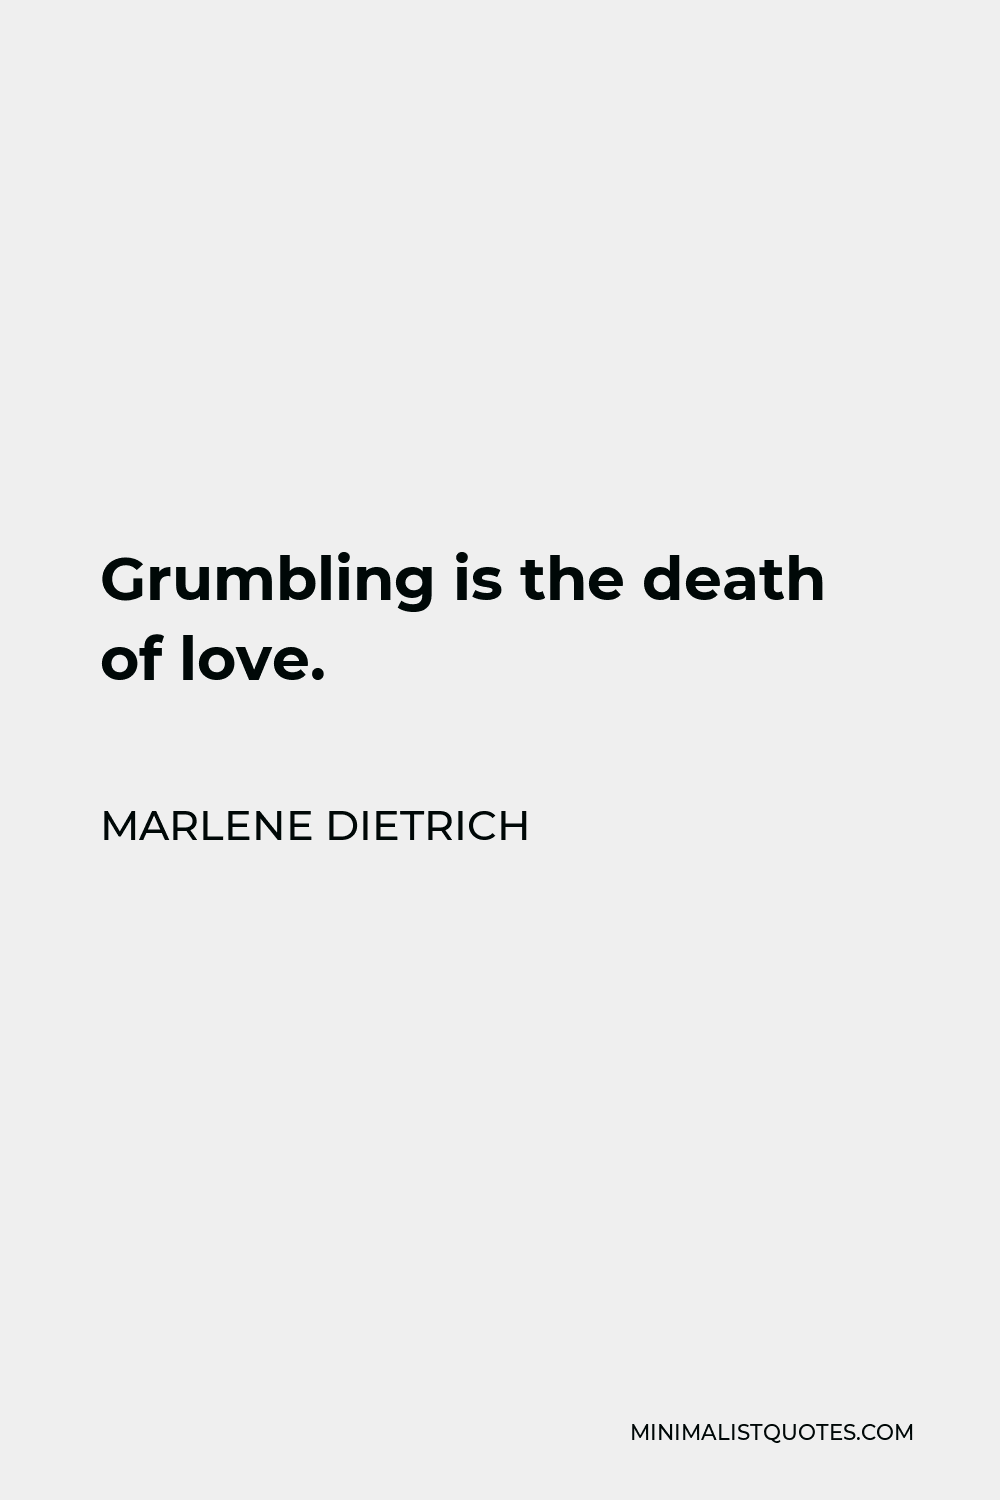 Marlene Dietrich Quote - Grumbling is the death of love.